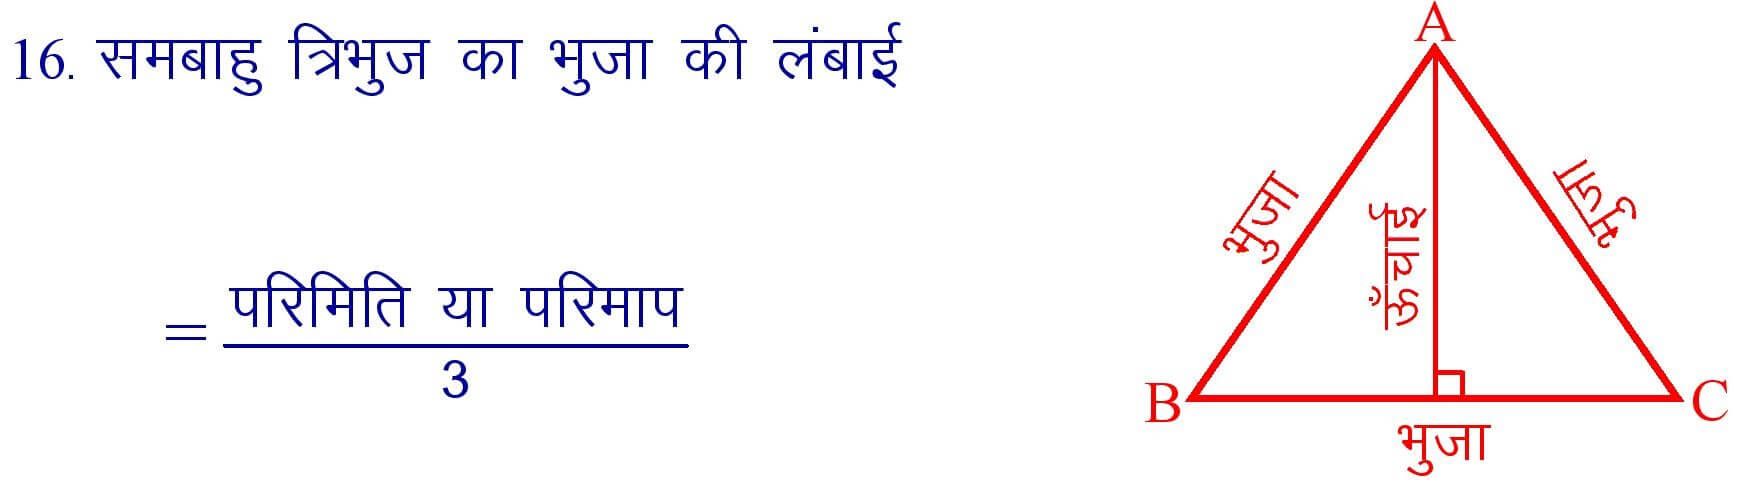 side of equilateral triangle formula in hindi